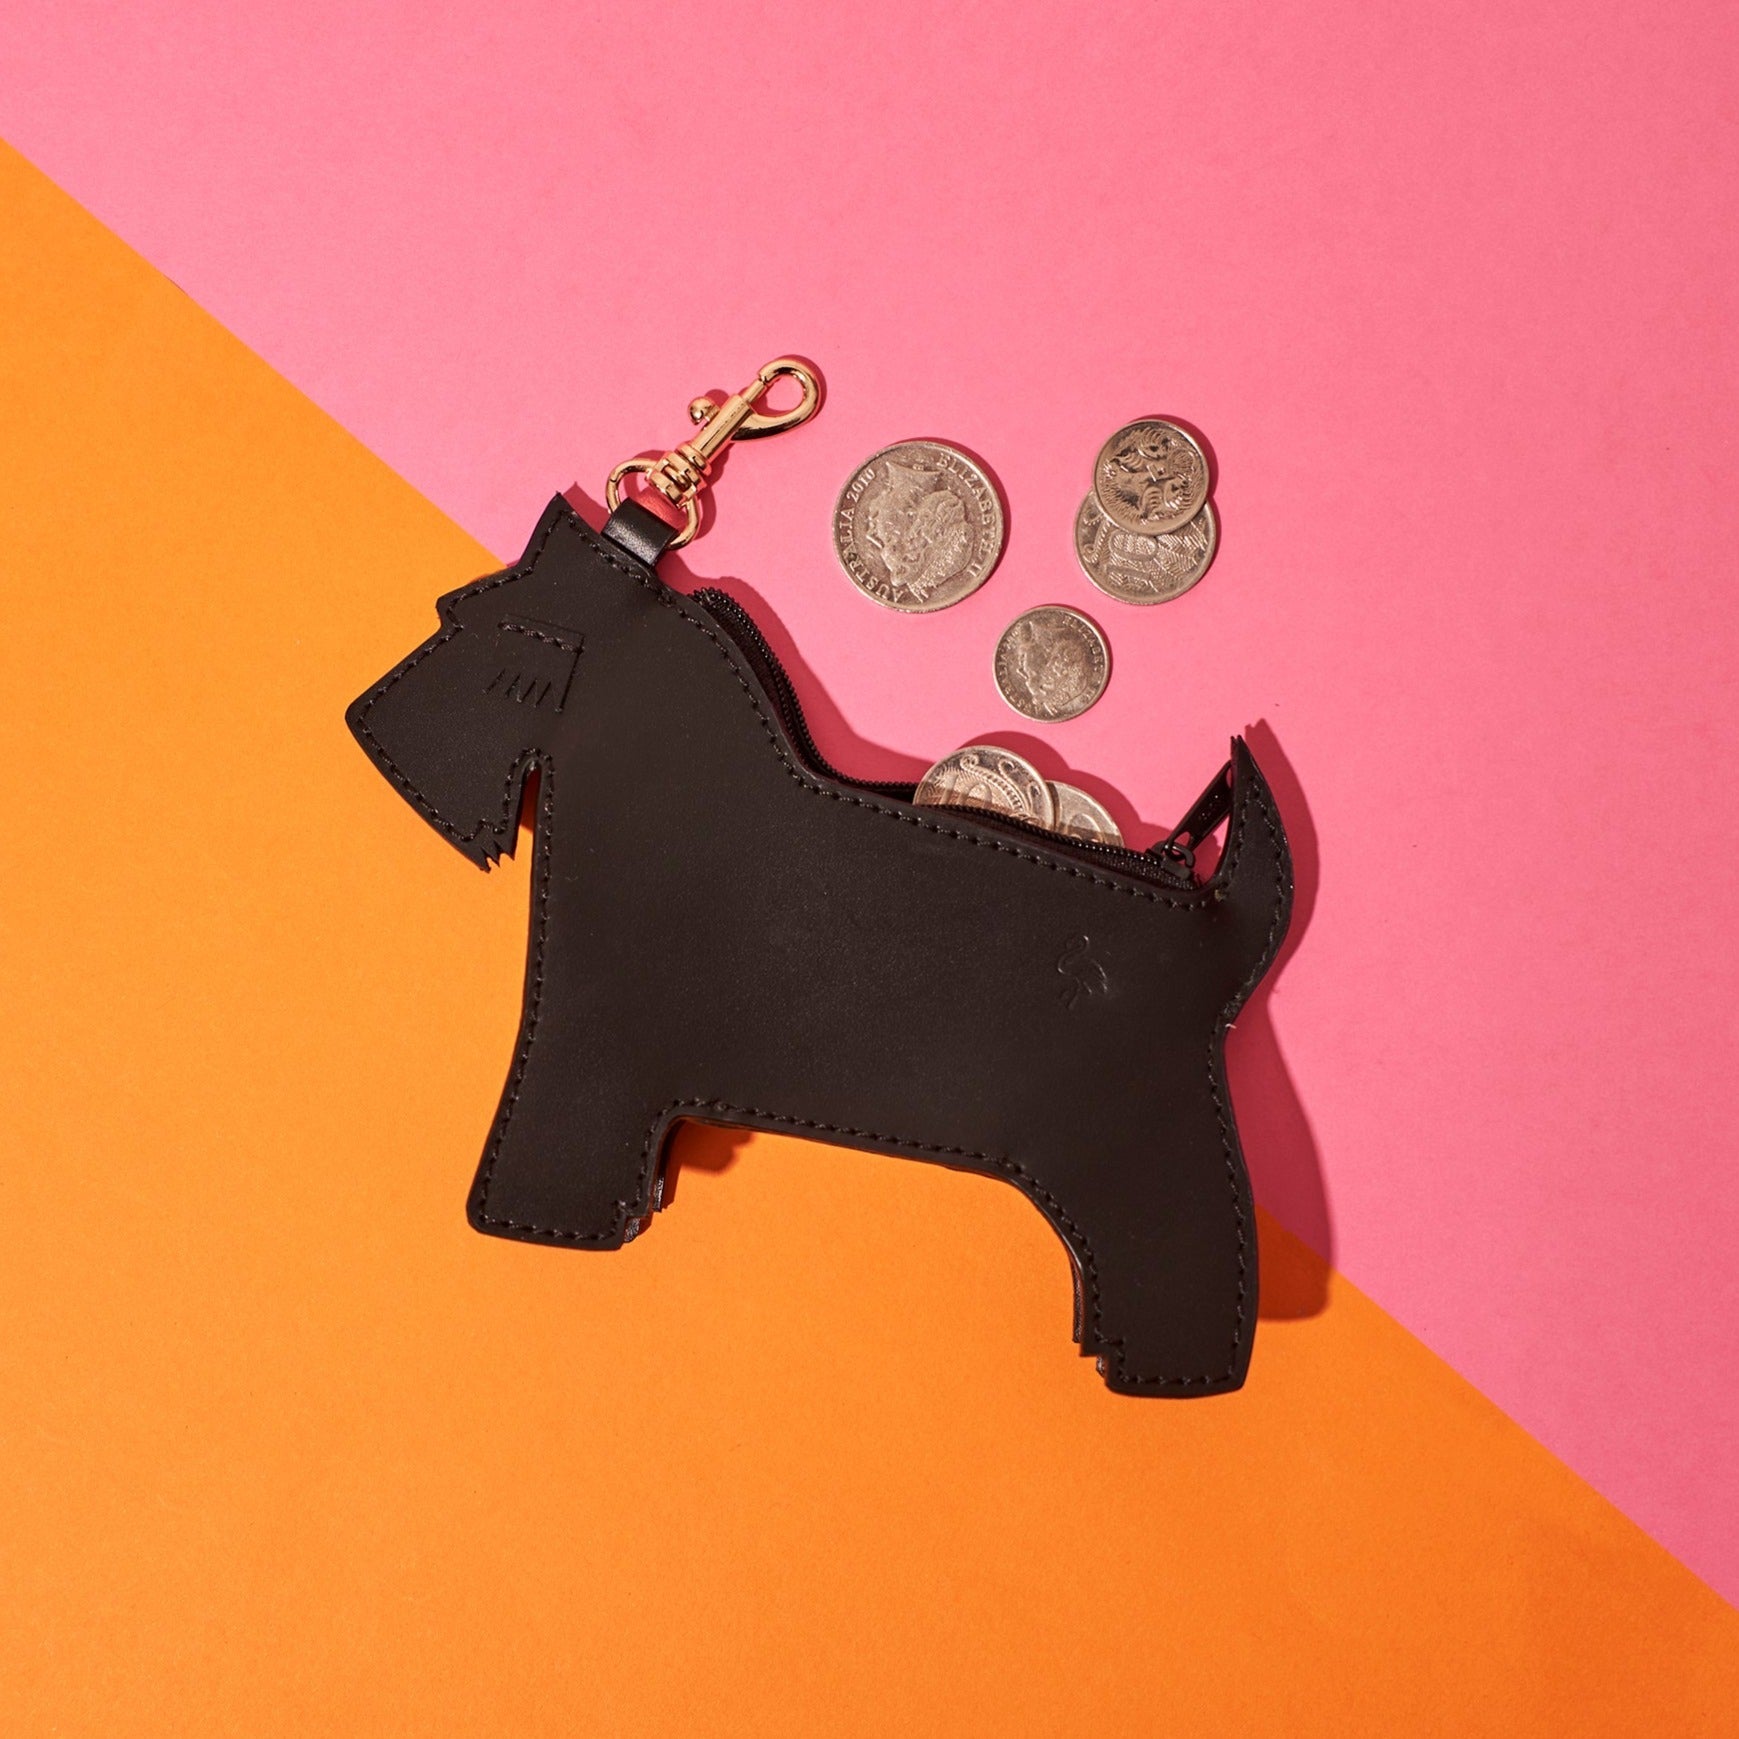 Wicker Darling's Scottie the Scottish Terrier Coin Purse on a colourful background